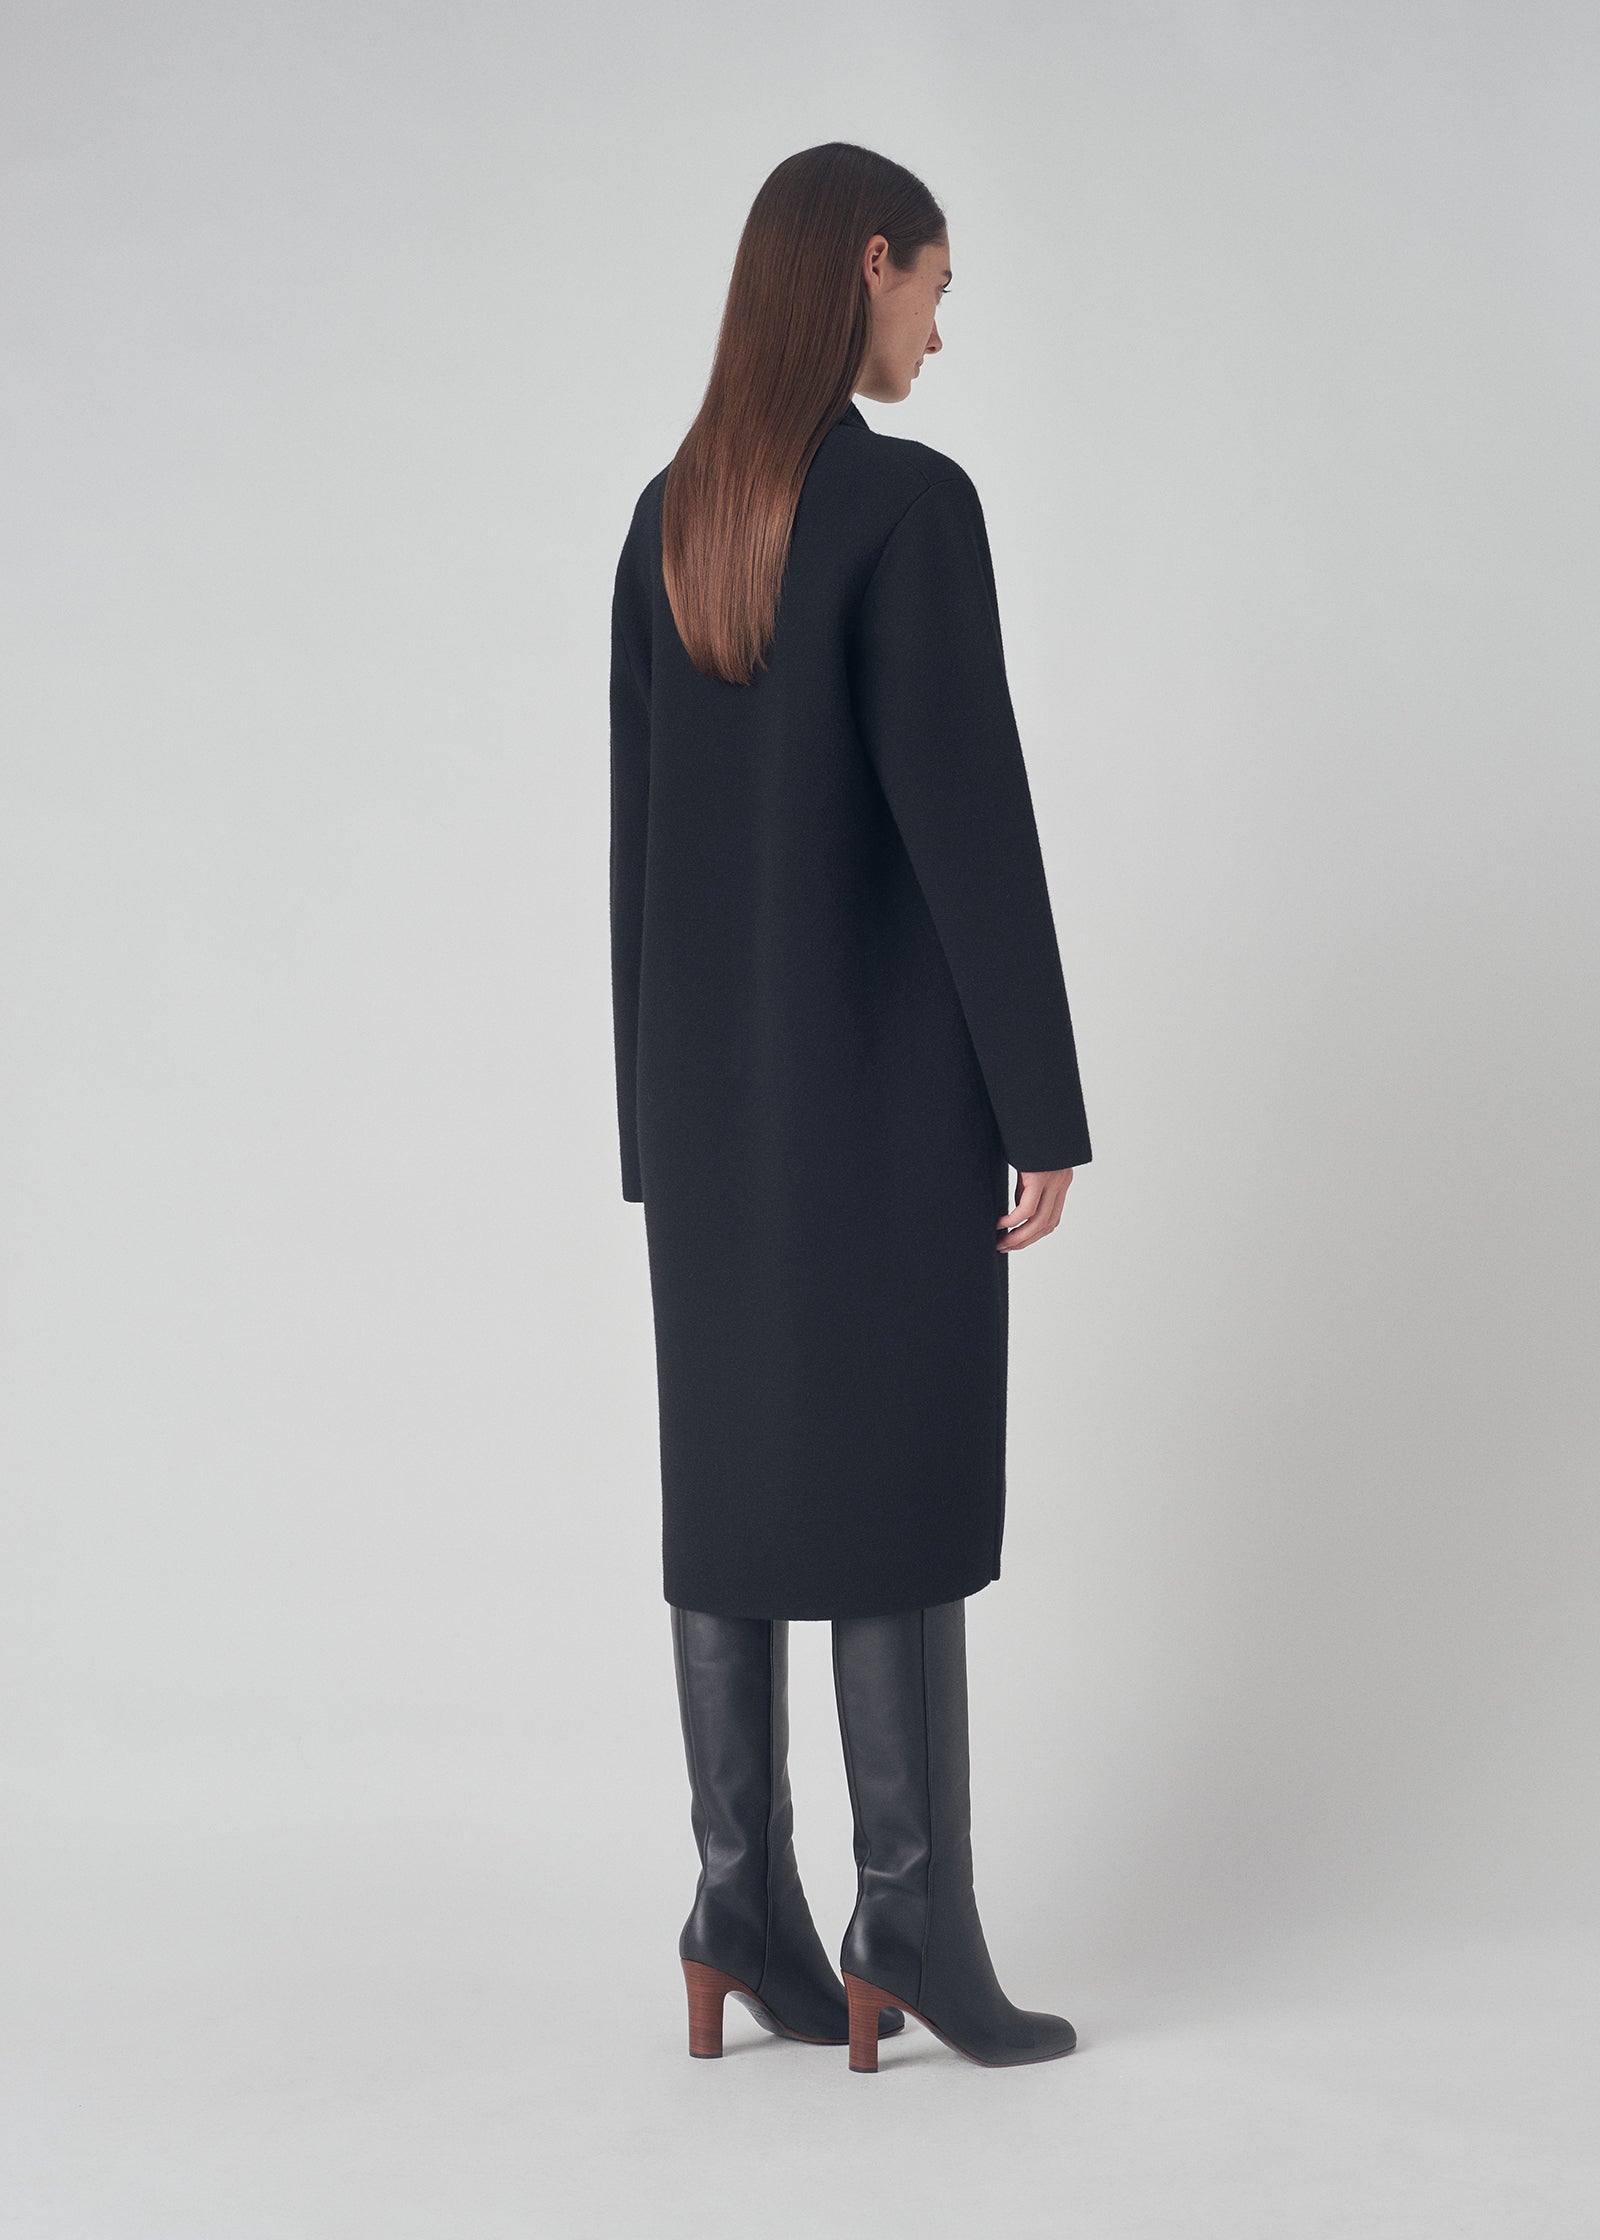 Compact Knit Coat in Merino Wool - CO Collections